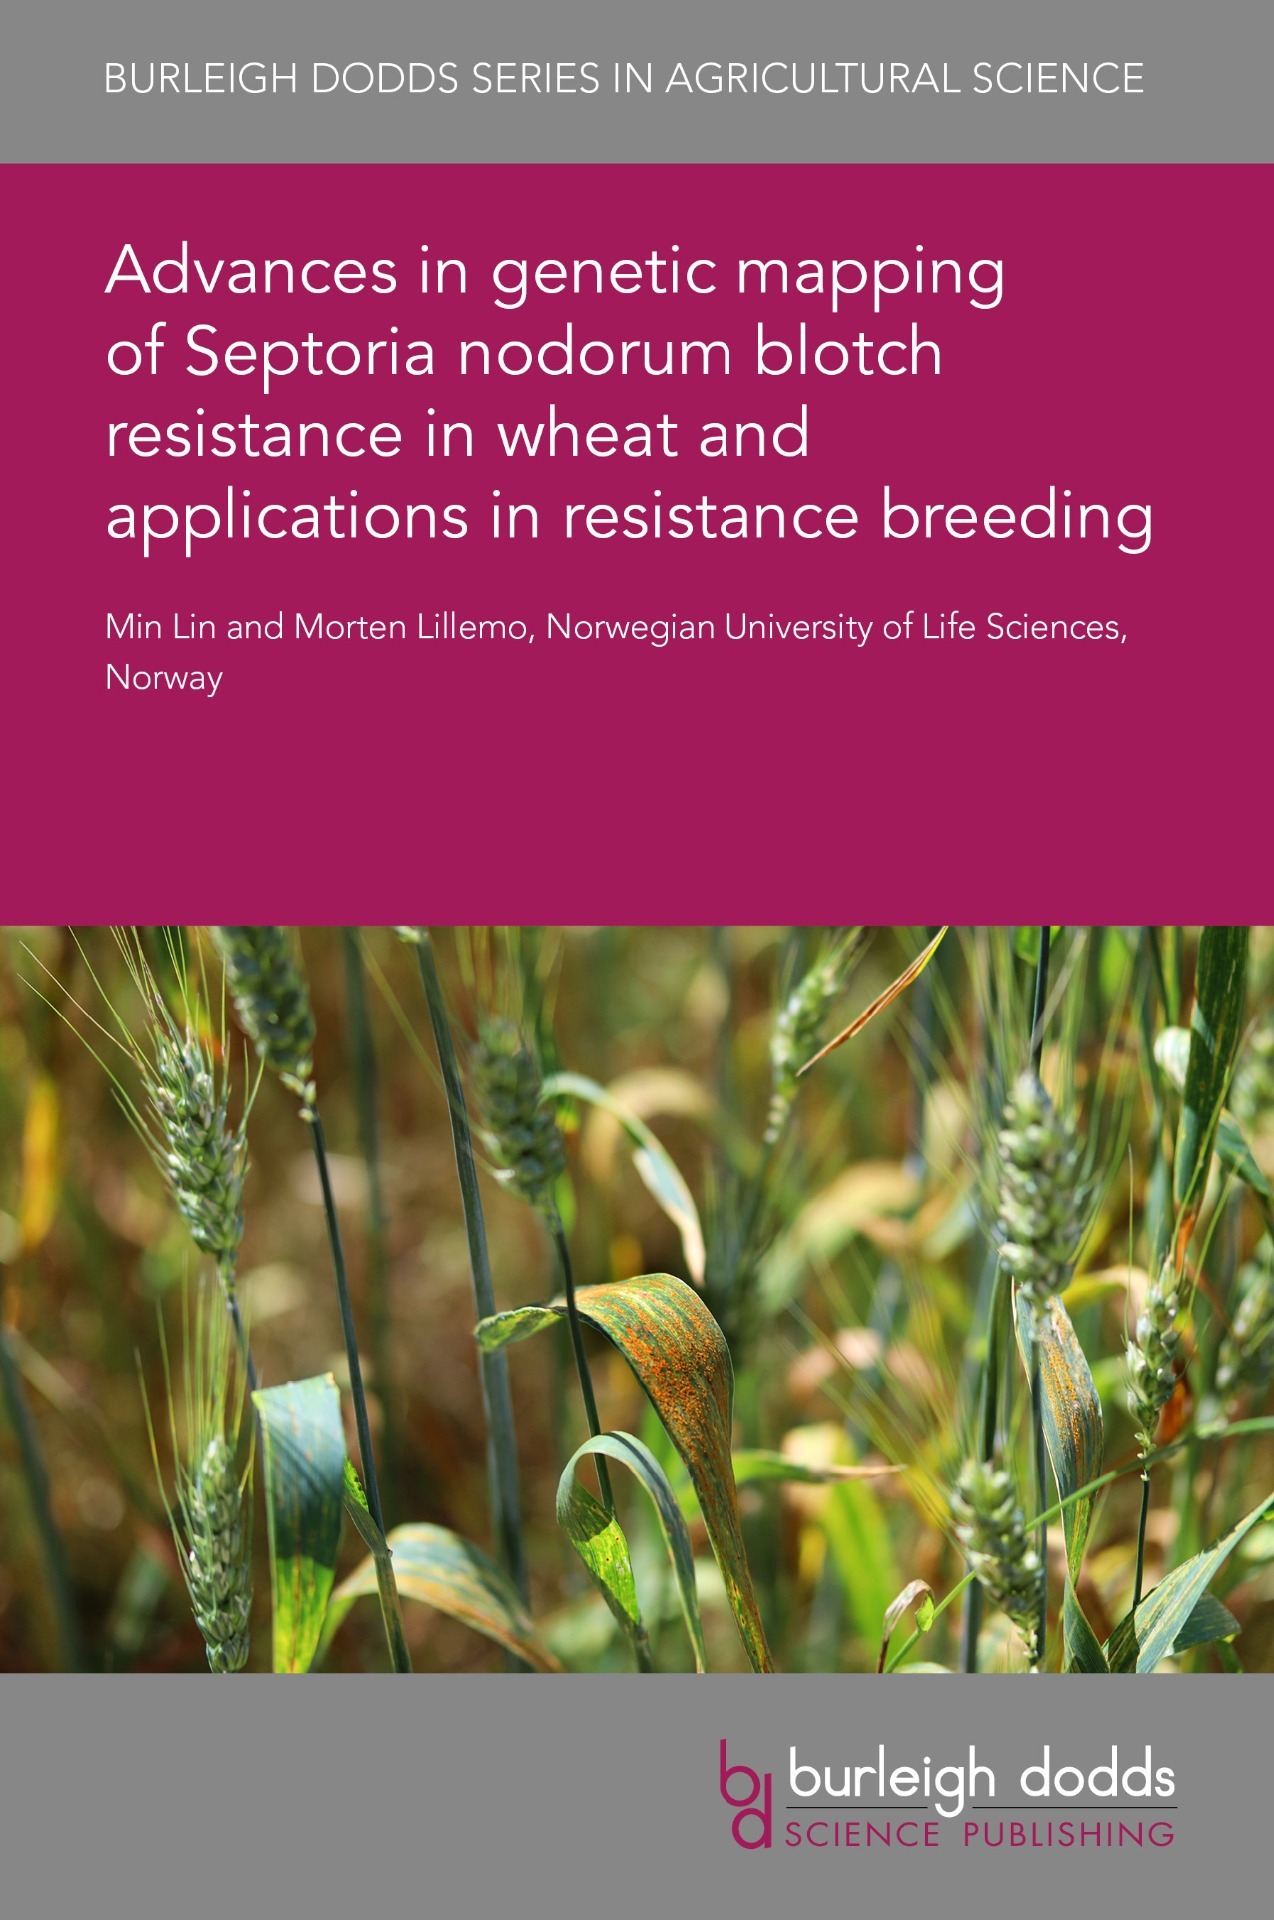 Advances in genetic mapping of Septoria nodorum blotch resistance in wheat and applications in resistance breeding